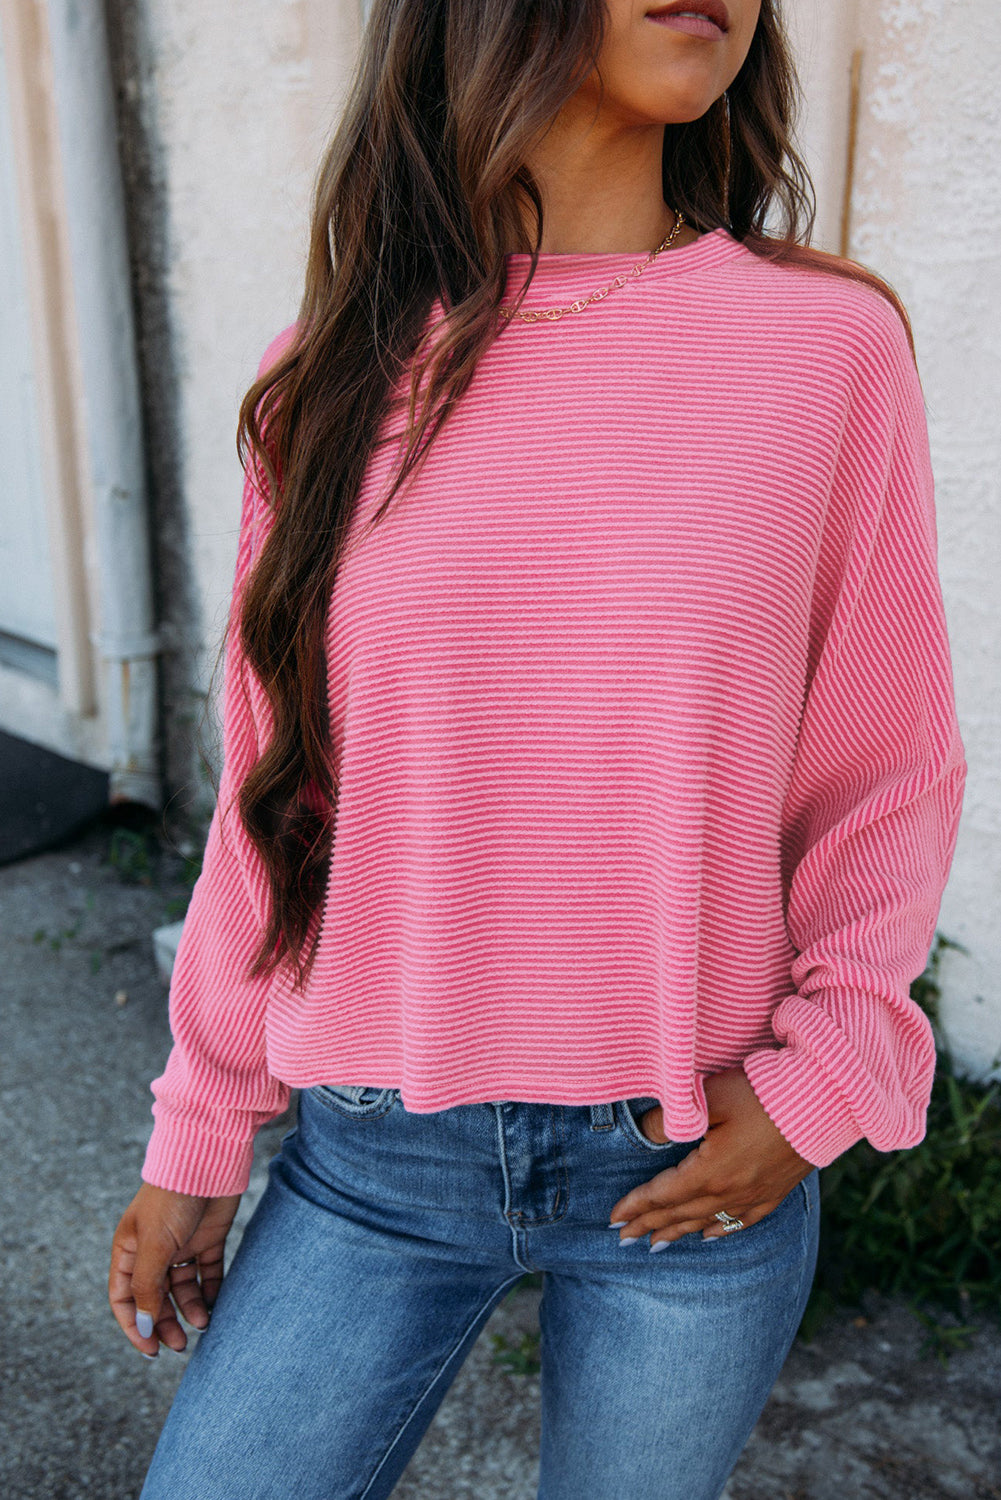 Pink Long Sleeve Top | Solid Color Textured Long Sleeve Tee